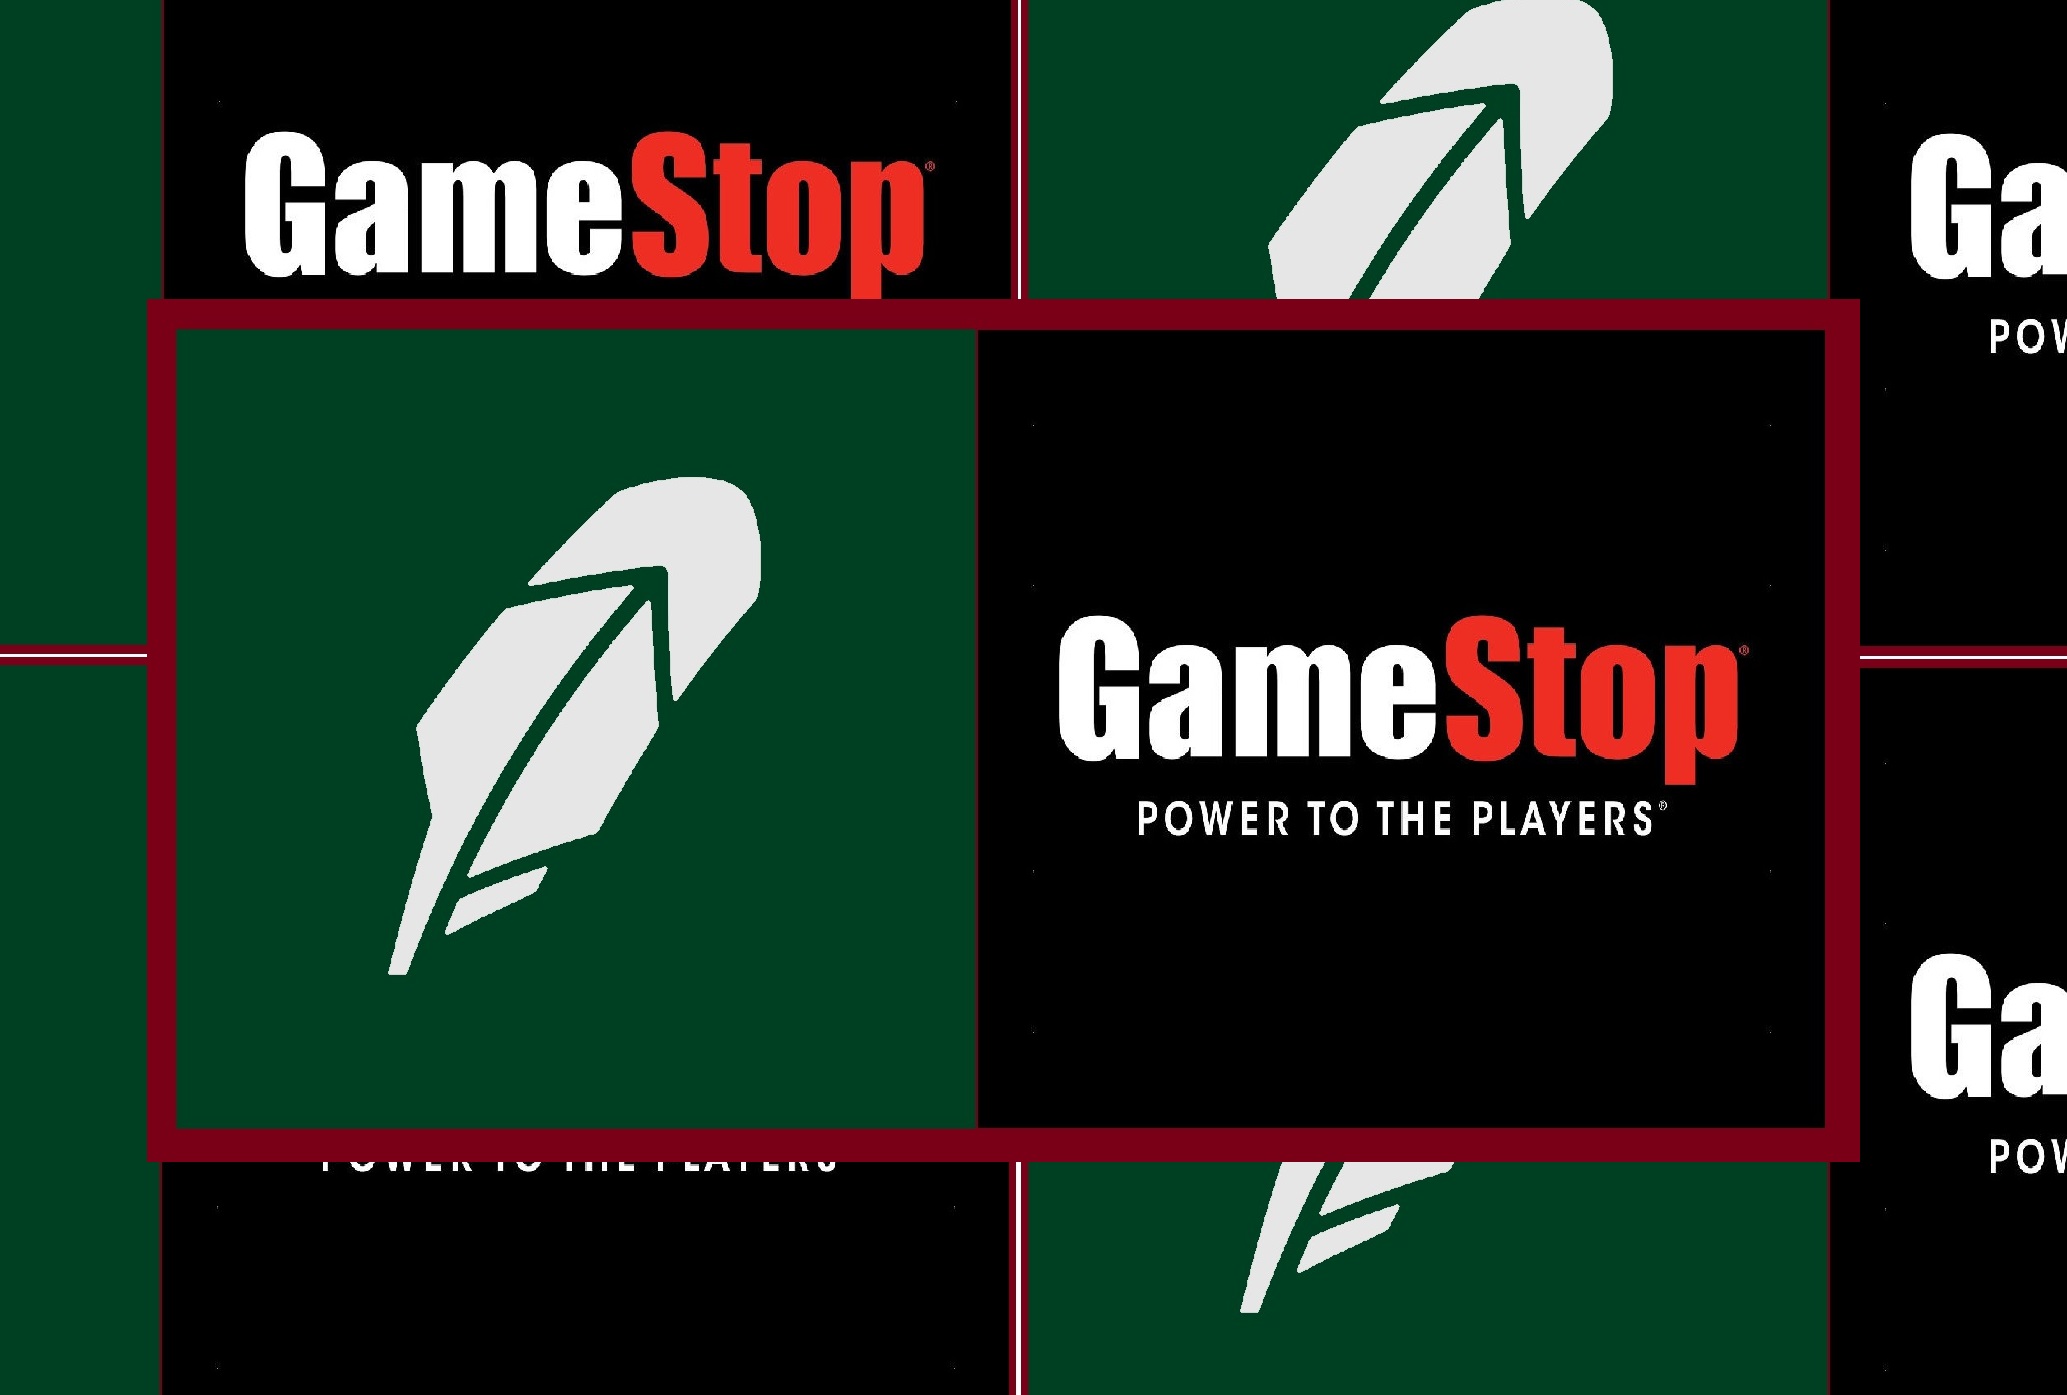 Hedge funds, Robinhood face grilling by Congress over GameStop Reddit rally